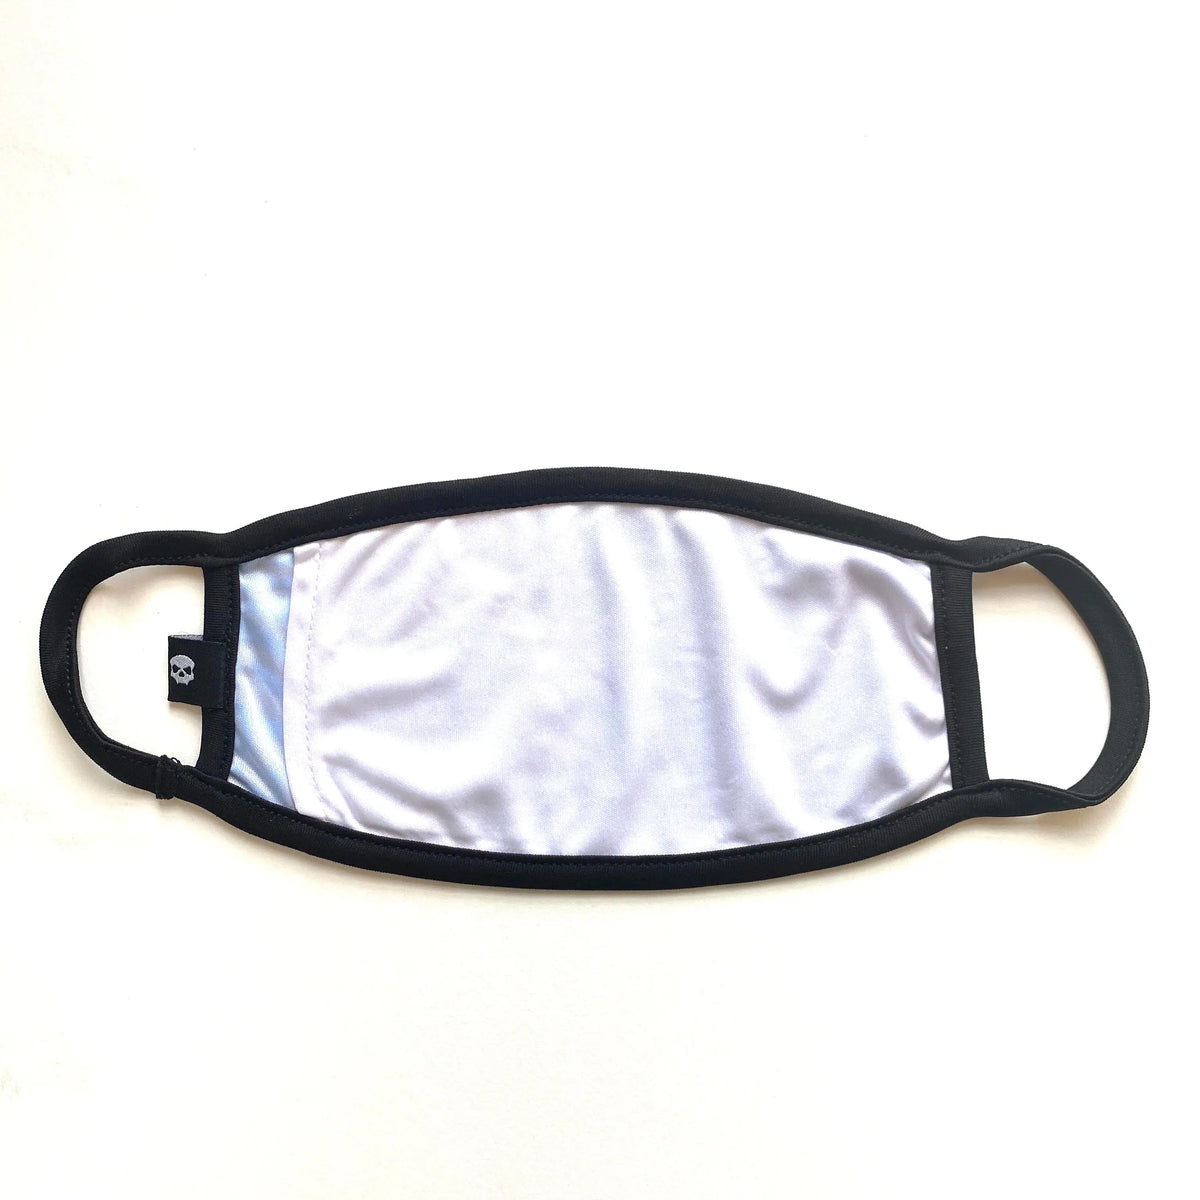 Filter Face Mask T-King (includes 5 PM2.5 filters)